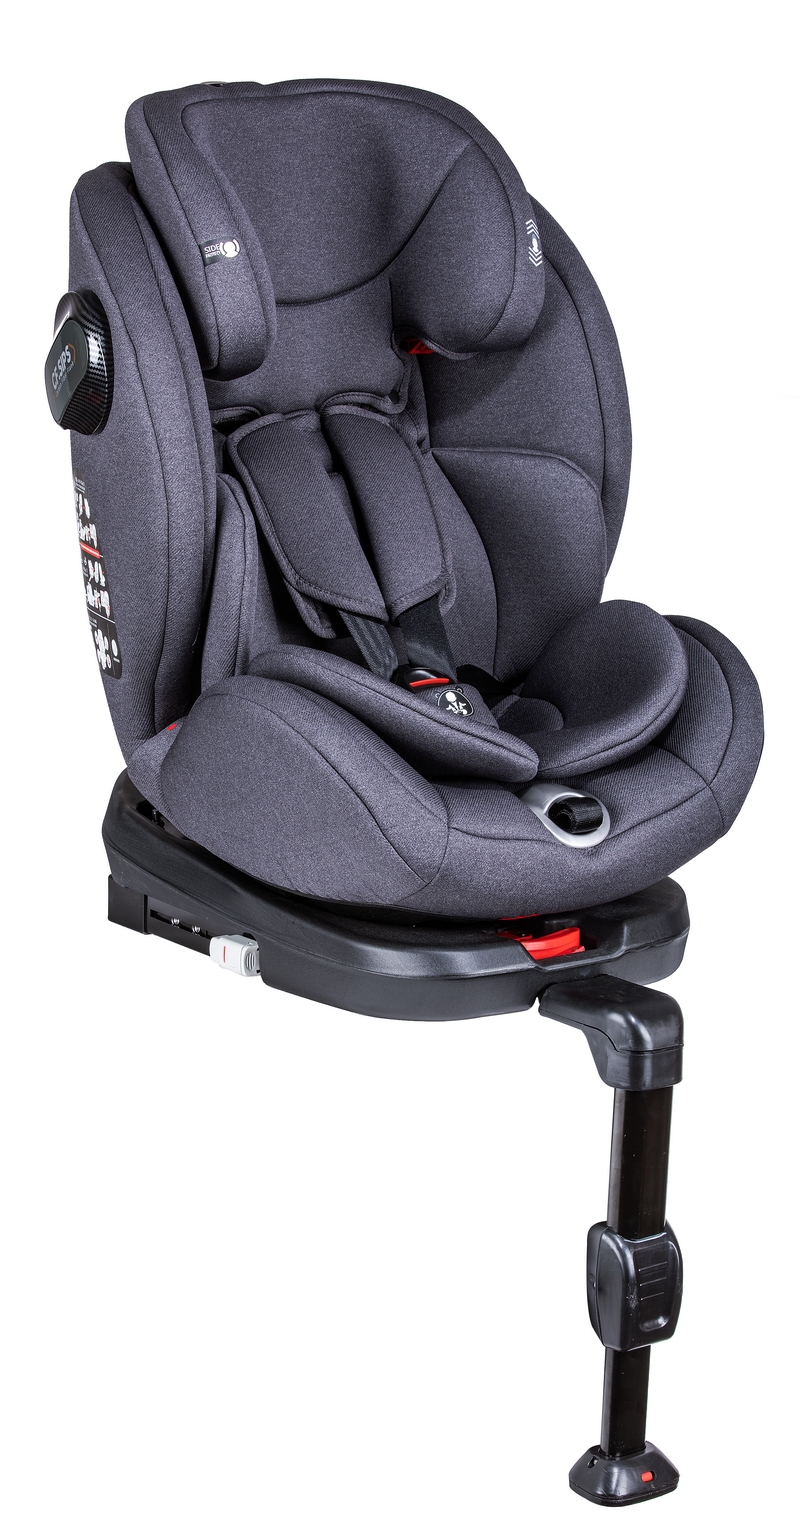 Infant Safety Seat 360 Degree Rotation with Support Leg 0-36kg